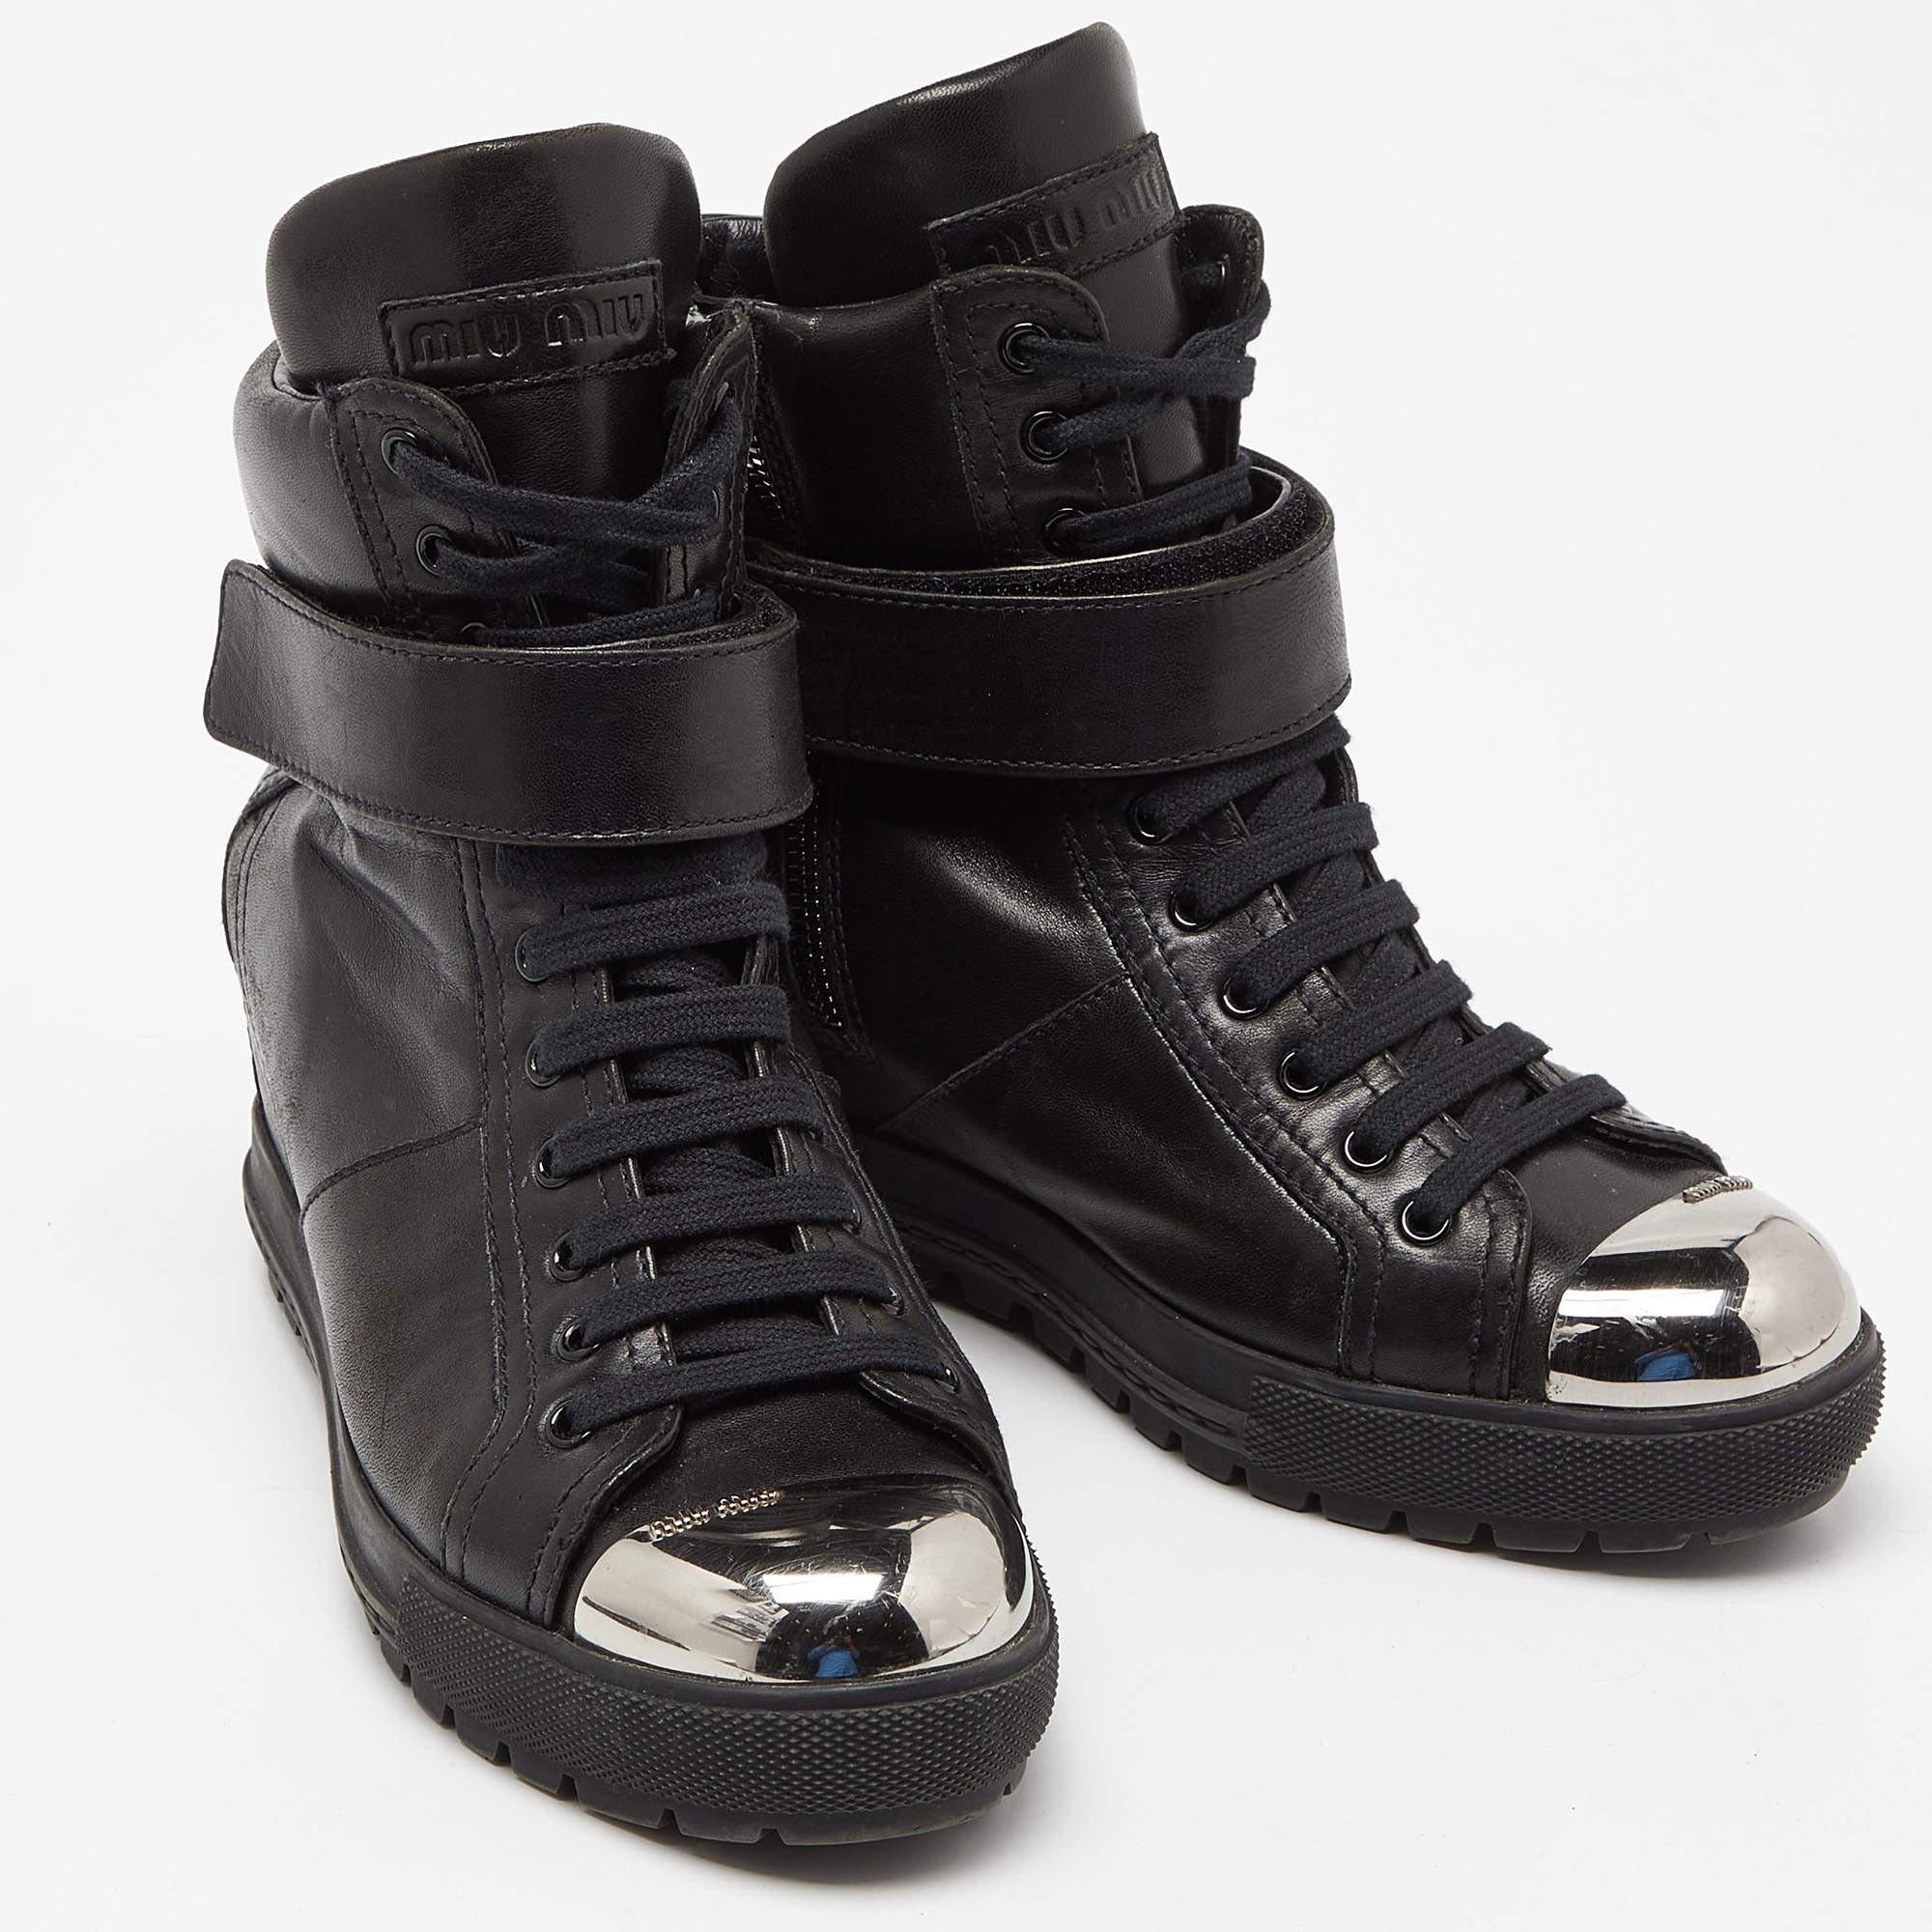 Miu Miu Black Leather Toe Cap Wedge Ankle Boots Size 38.5 For Sale 1